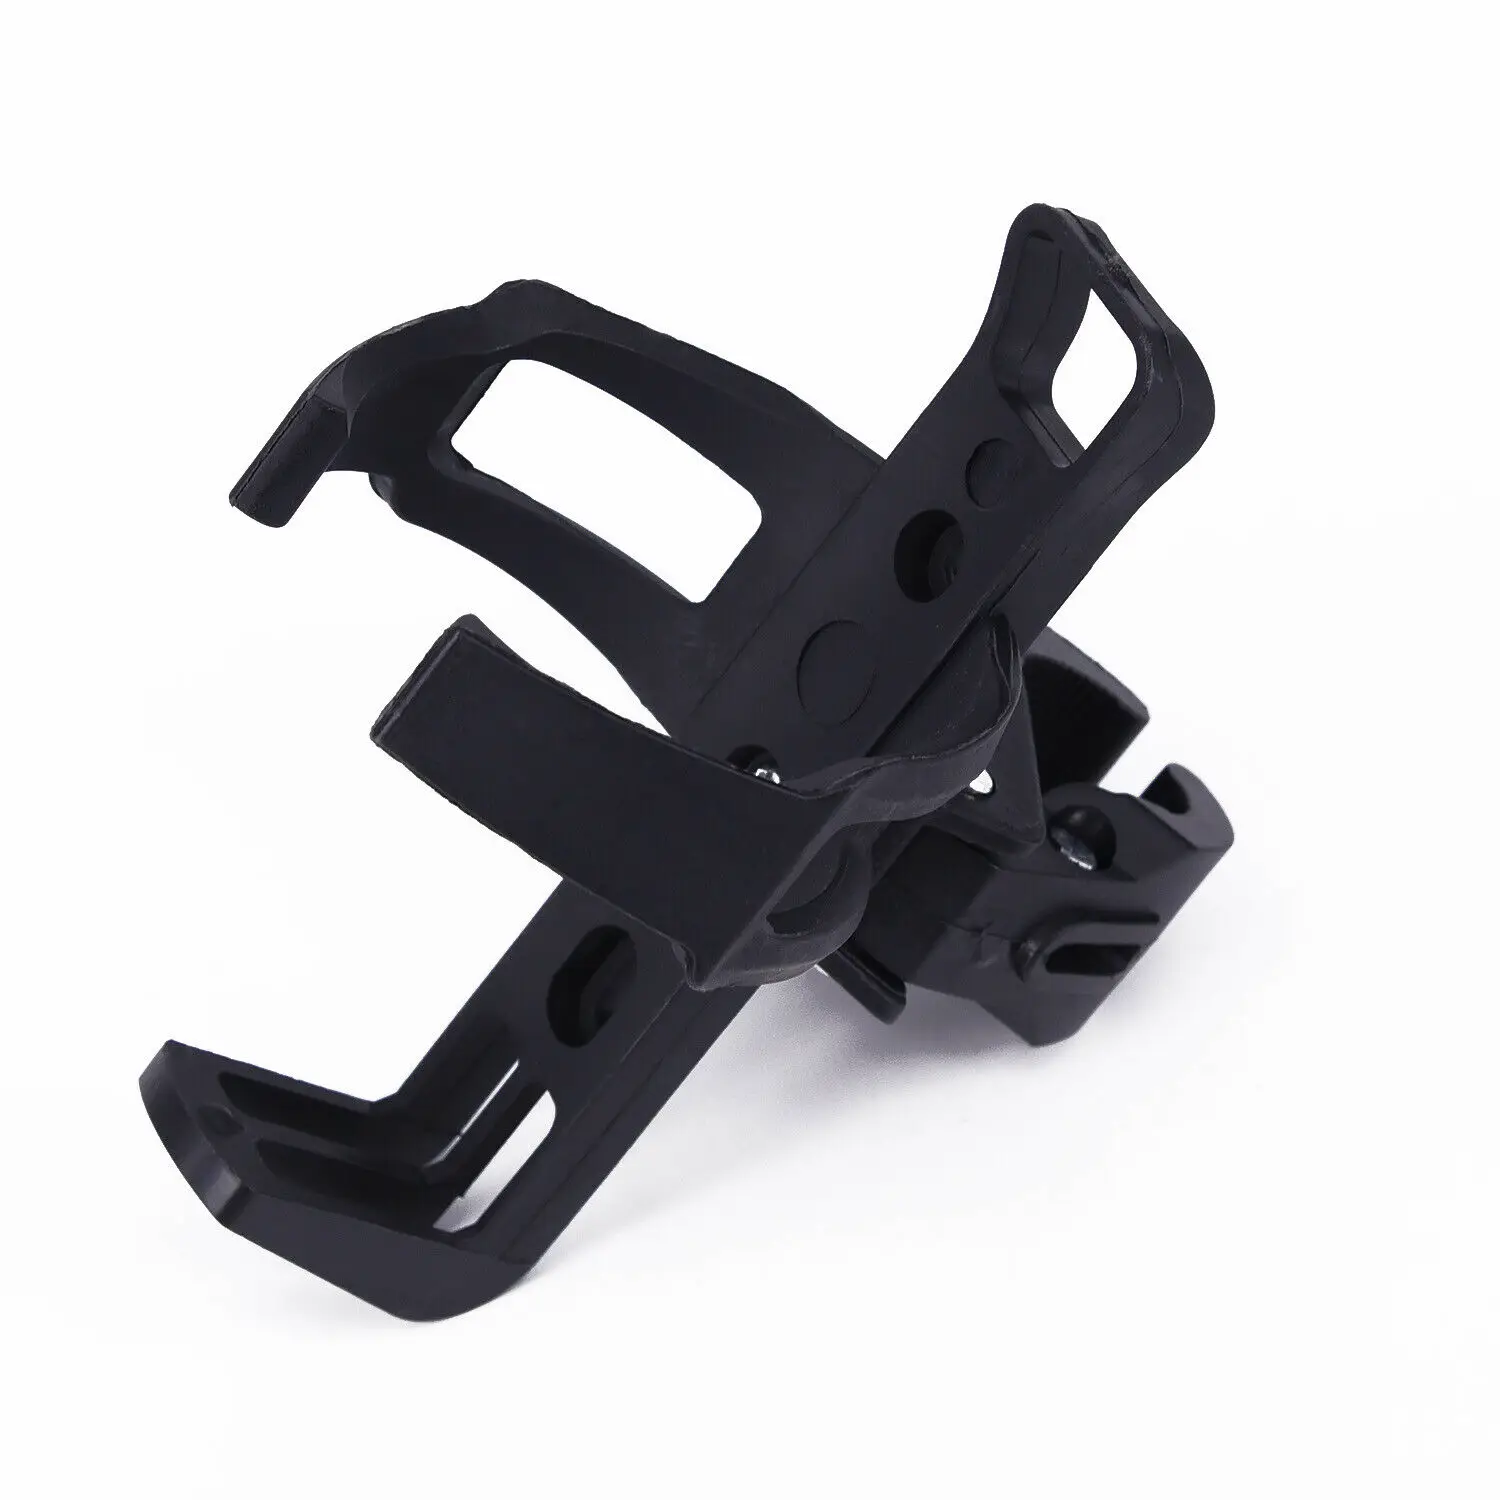 Bicycle Cup Holder Cup holder No Mar 1 Pcs Non Slip Quick Connect For 1/2" To 1 3/4" Motorcycle Bike 1 pcs Non slip images - 6